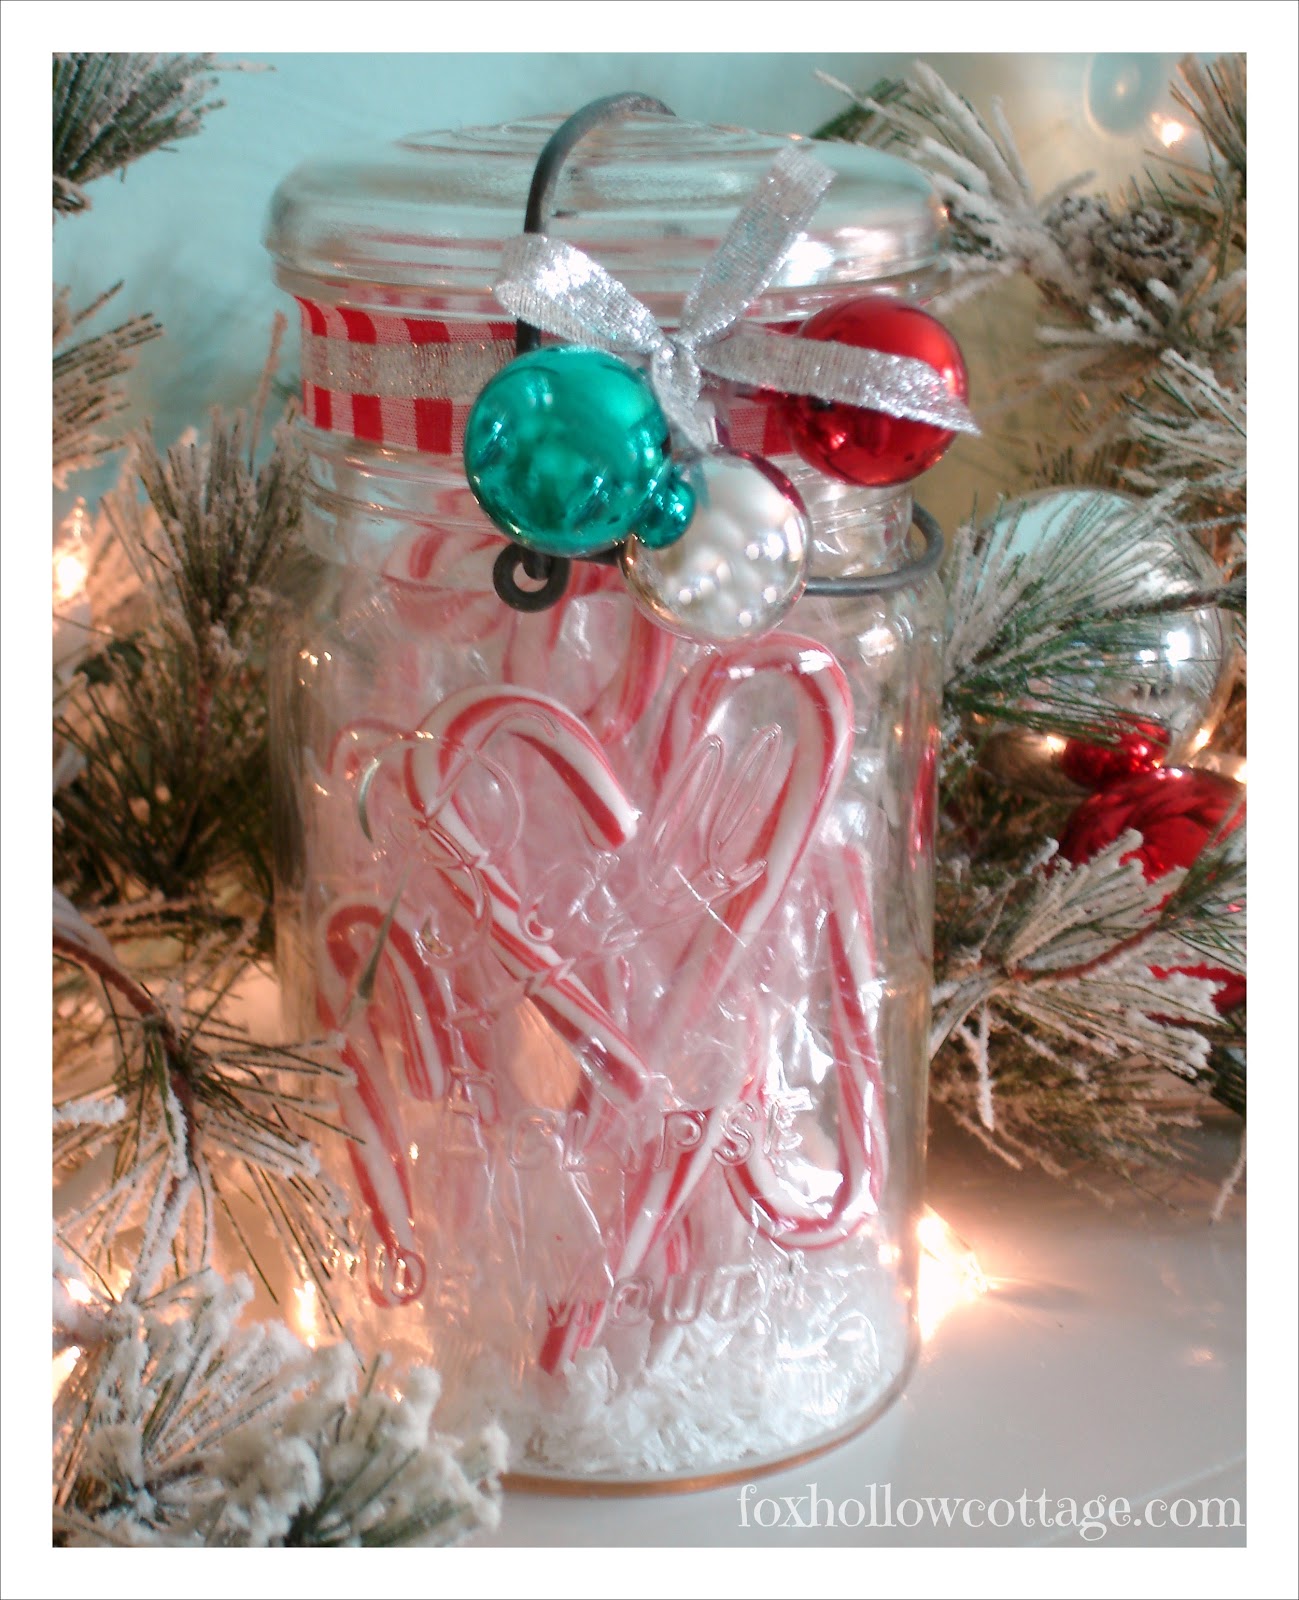 10 Quick Ideas For Decorating With Christmas Ornaments - Fox Hollow Cottage